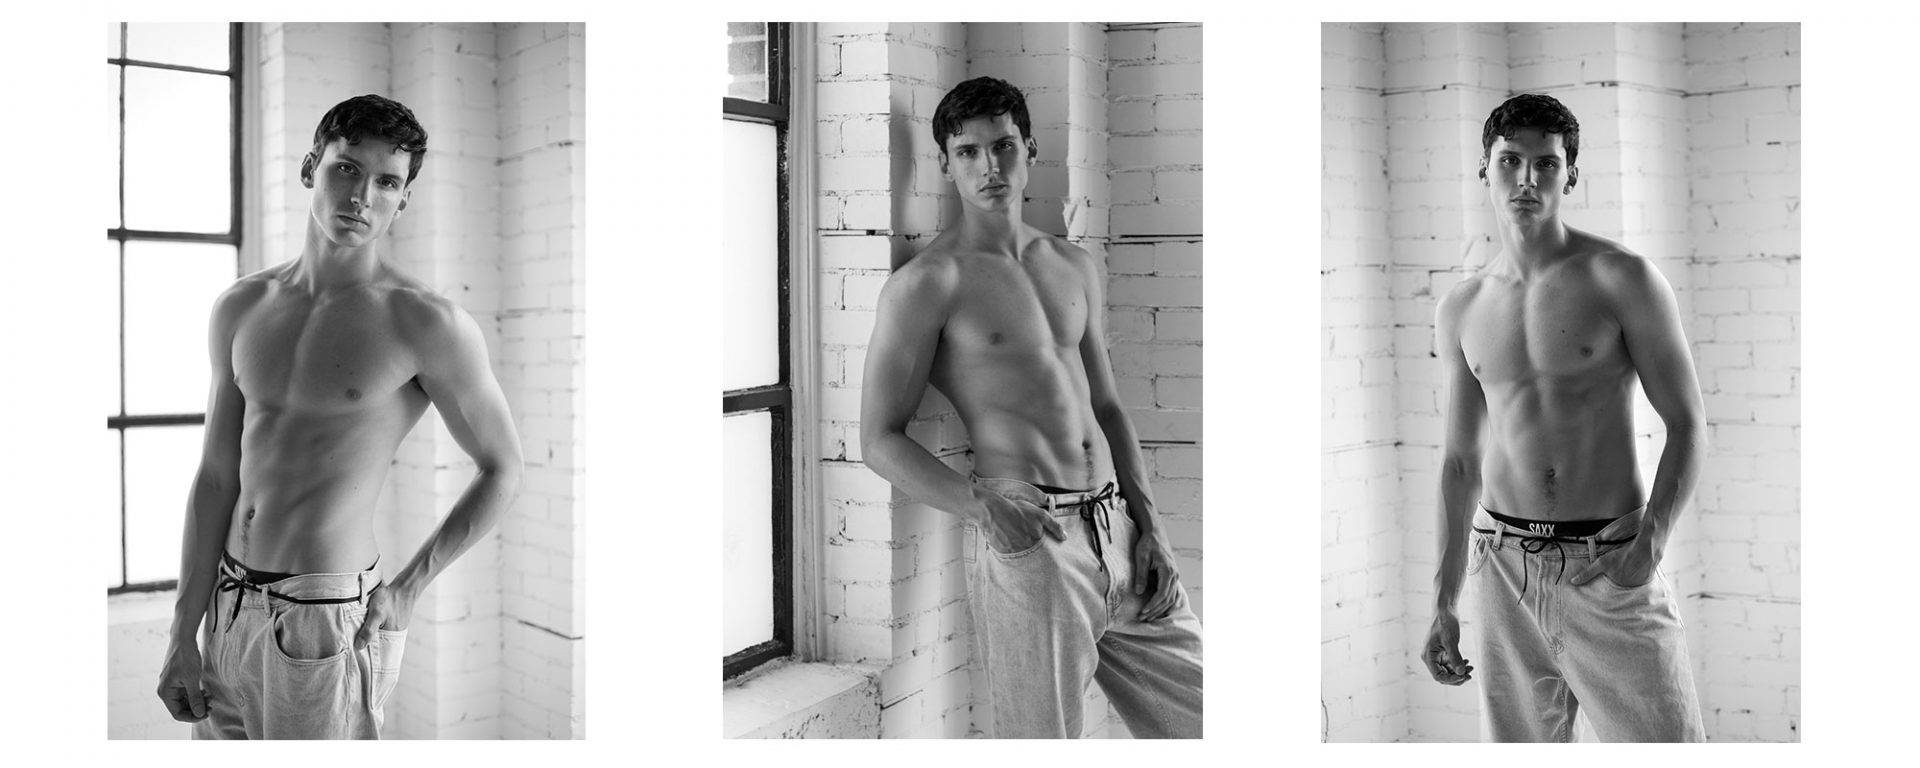 Shirtless male model posing for a professional photography studio.